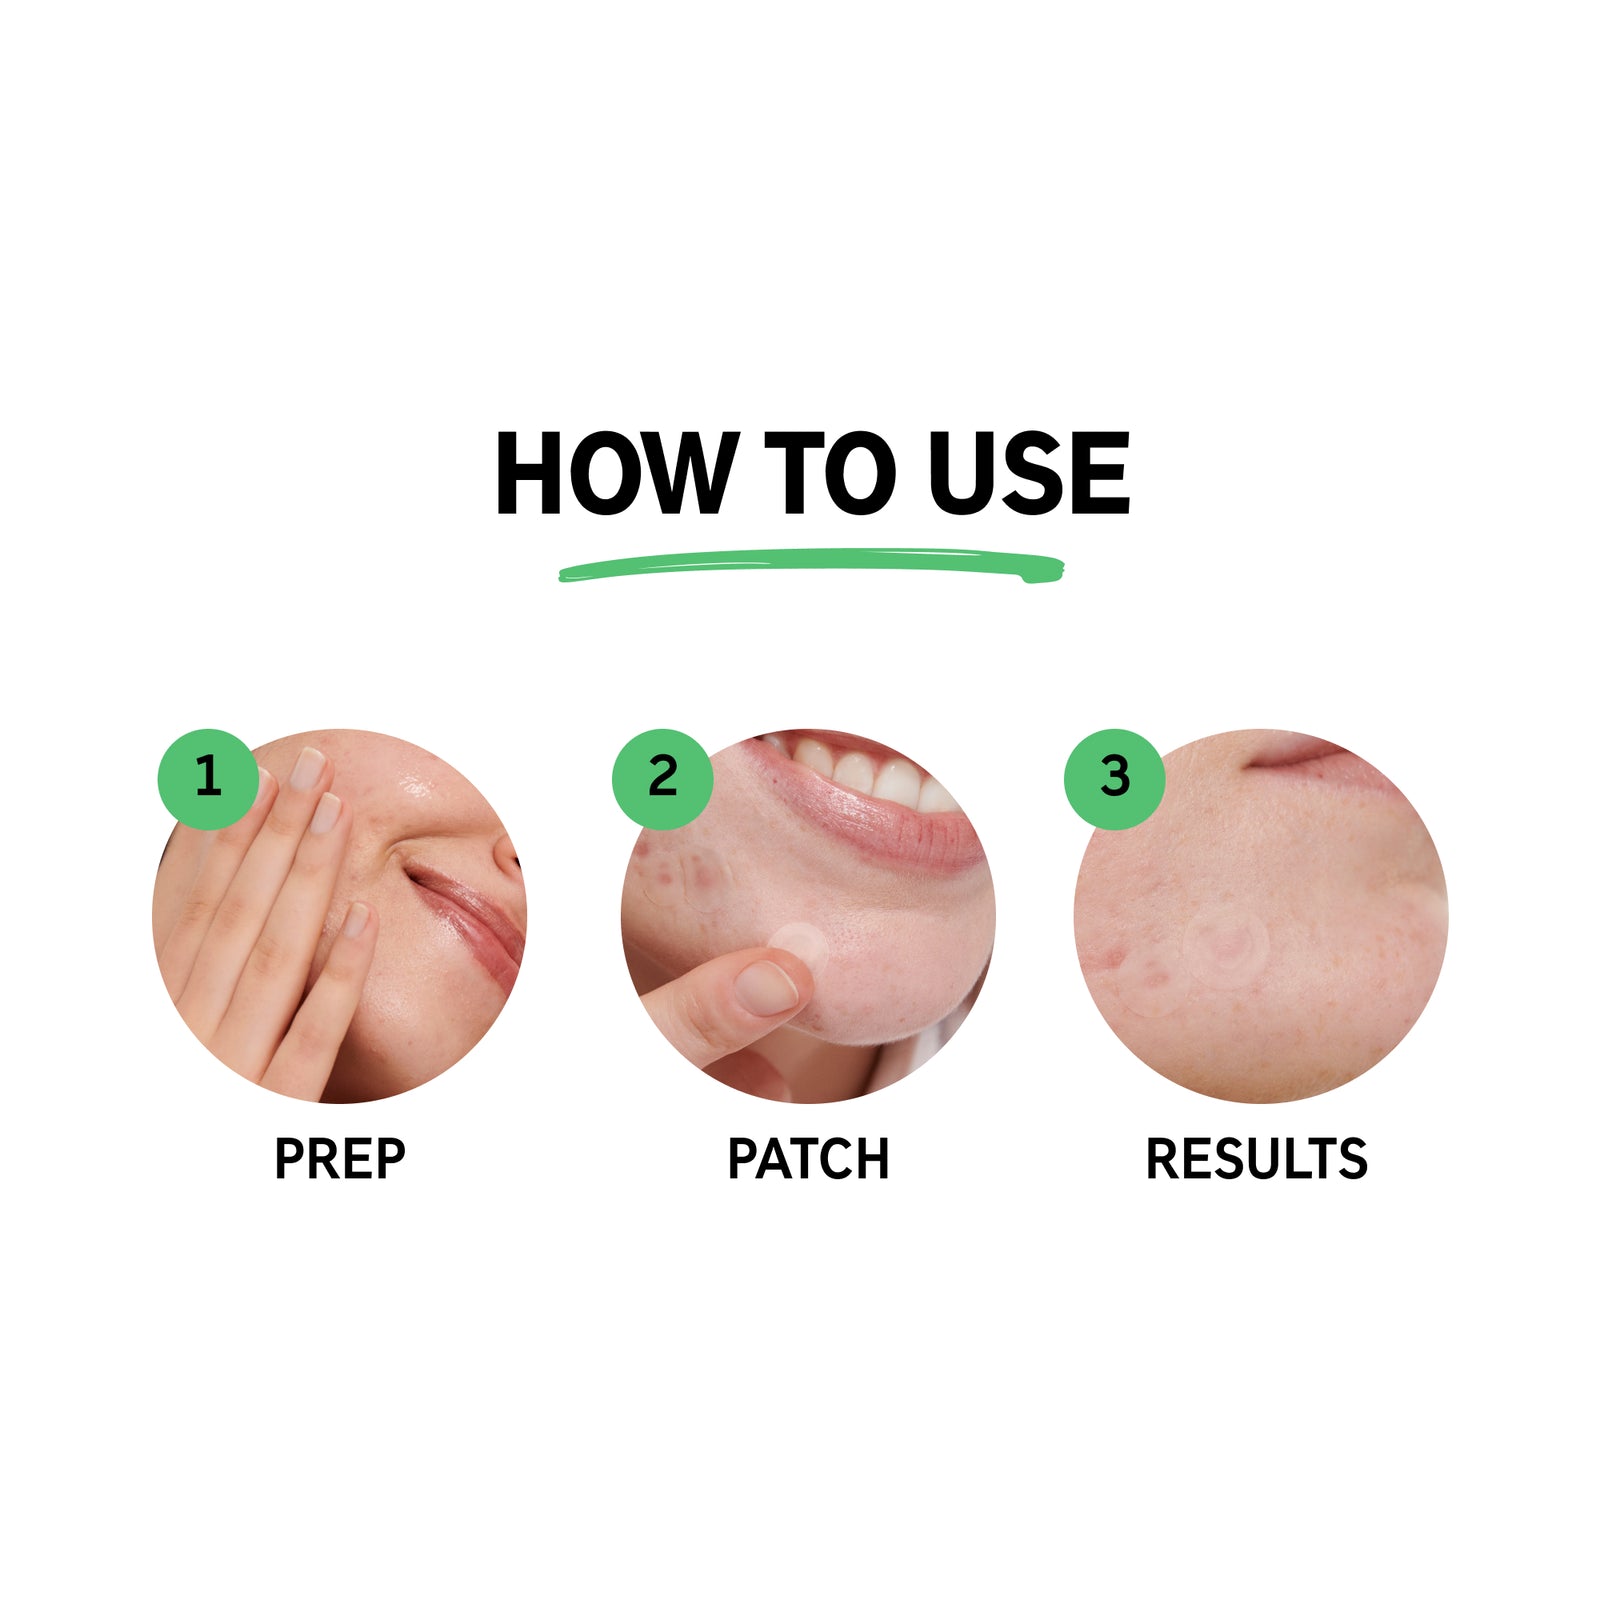 How to use: 1. Prep, 2. Patch, 3. Results